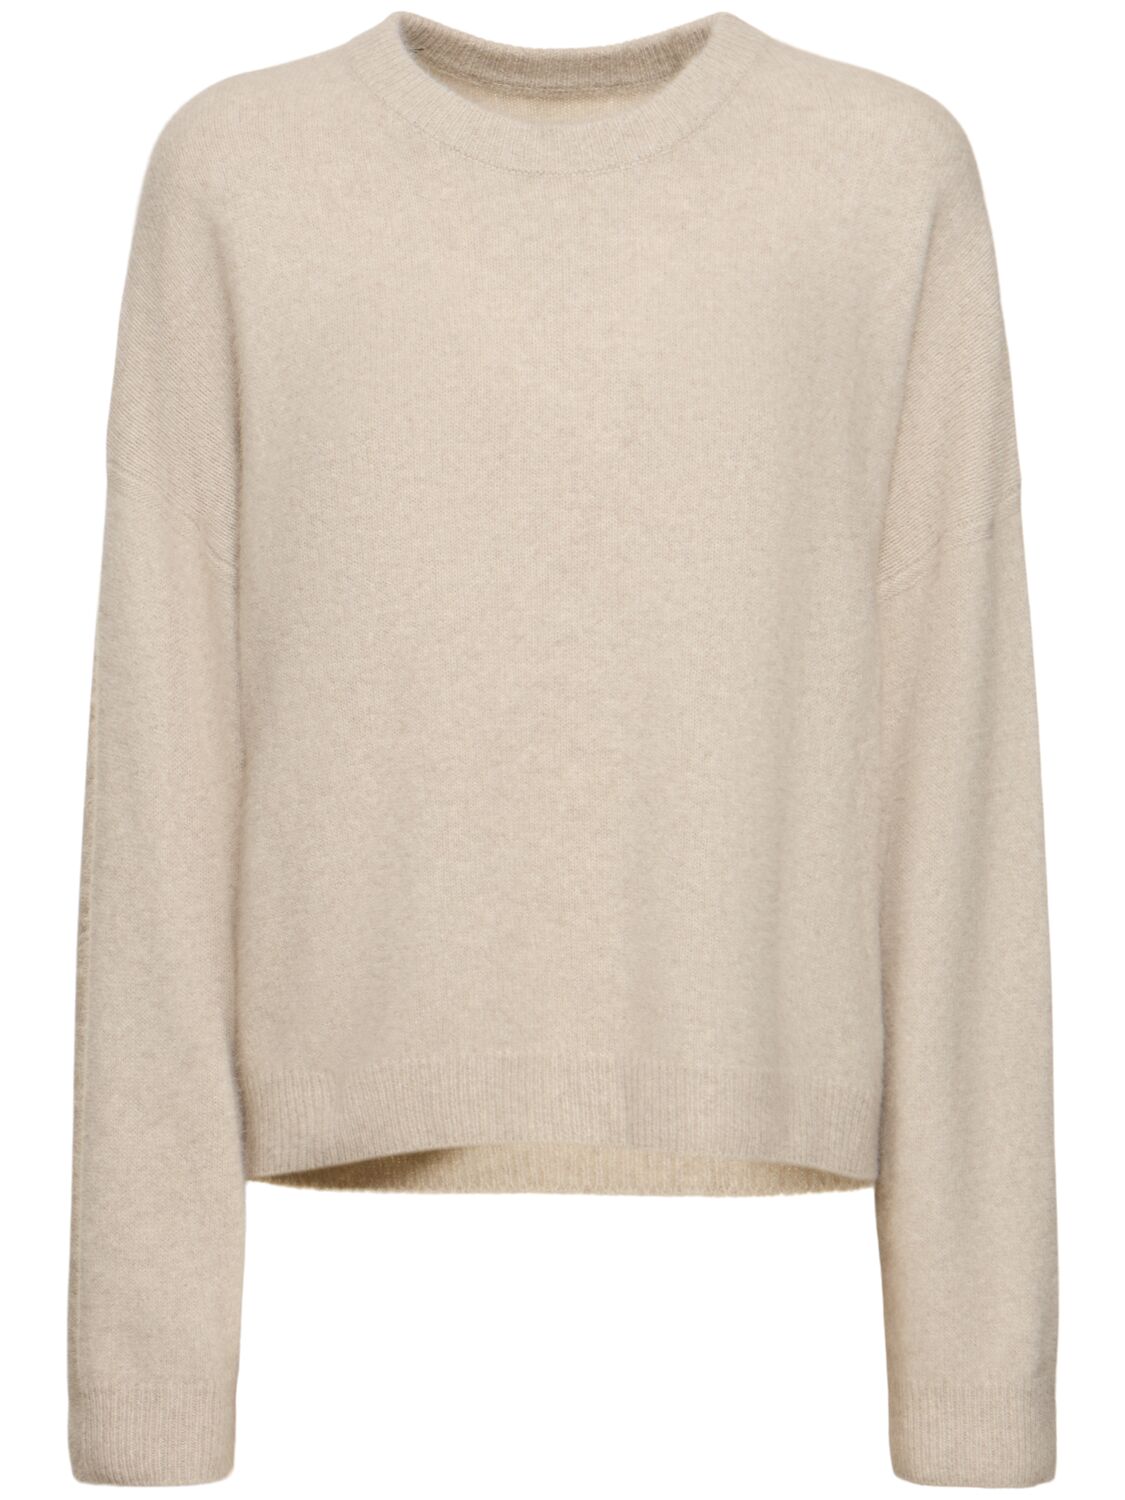 Loulou Studio Ropo Wool Blend Crewneck Sweater In Neutral